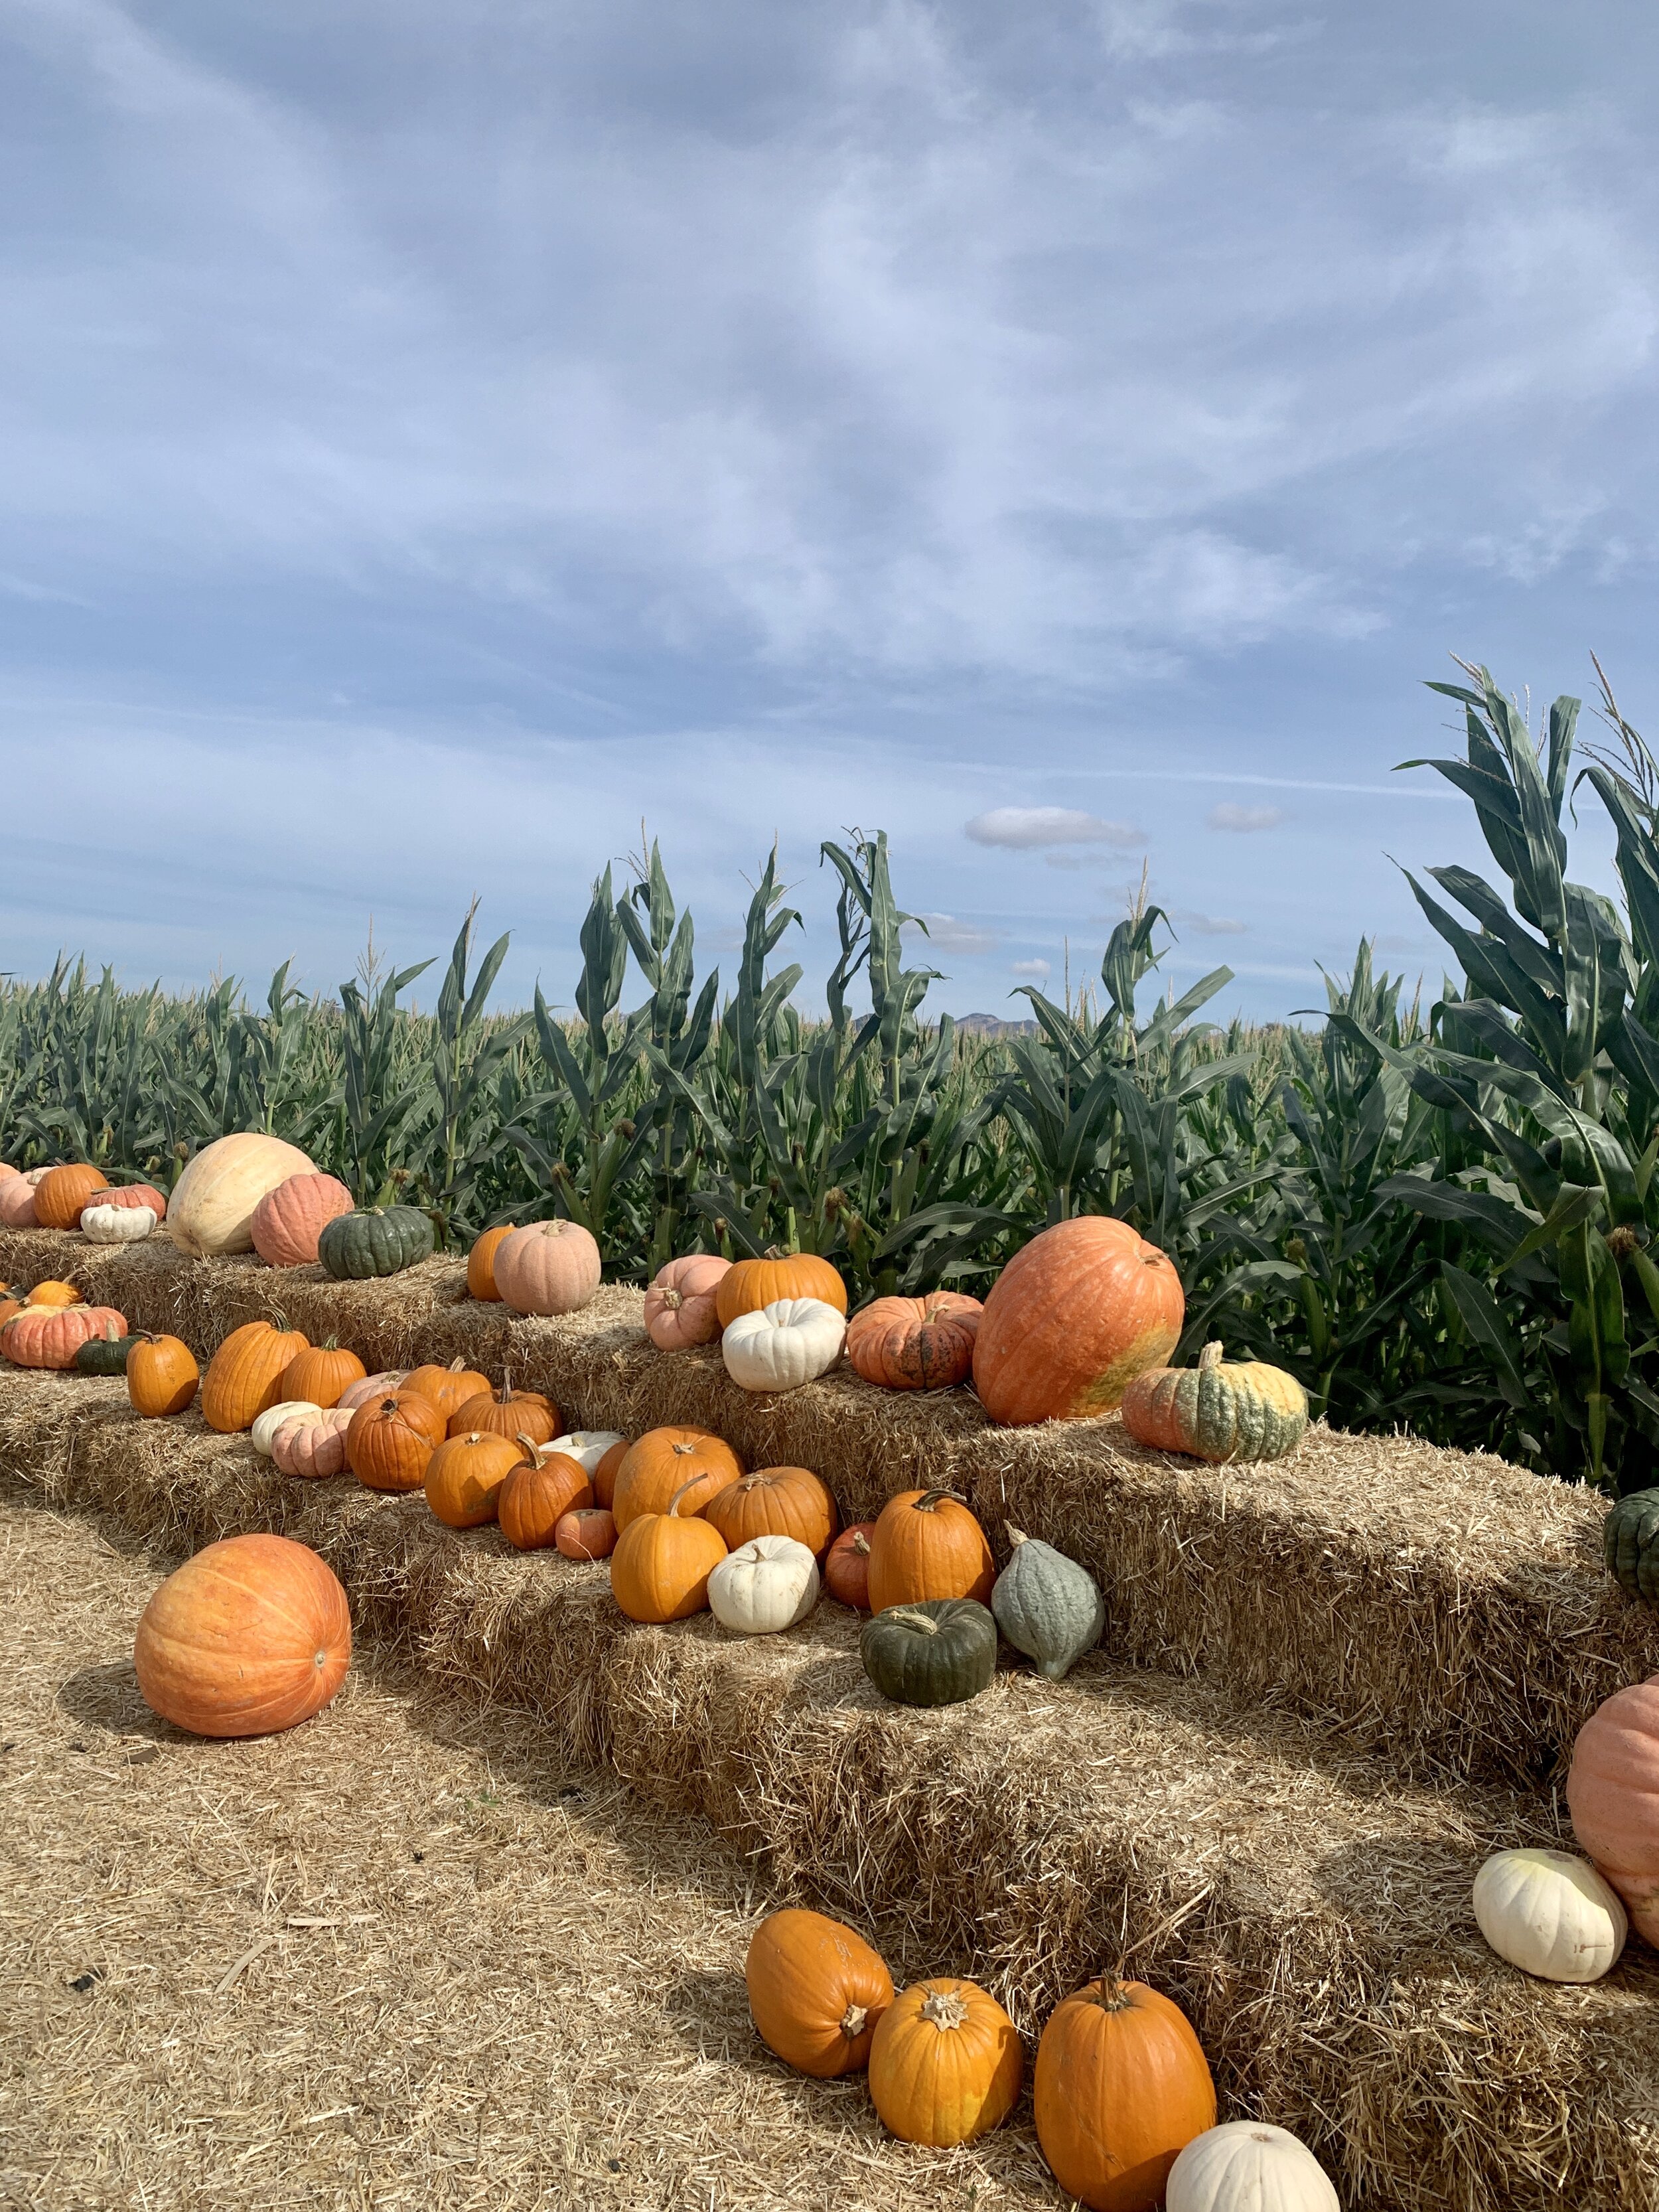 Swank Farms is the best pumpkin patch, sunflower fields and corn mazes near San Francisco and the Bay area. Swank Farms have a Fall Festival which is the perfect day trip from San Francisco, San Jose, Monterrey or Central California. The pumpkin pat…